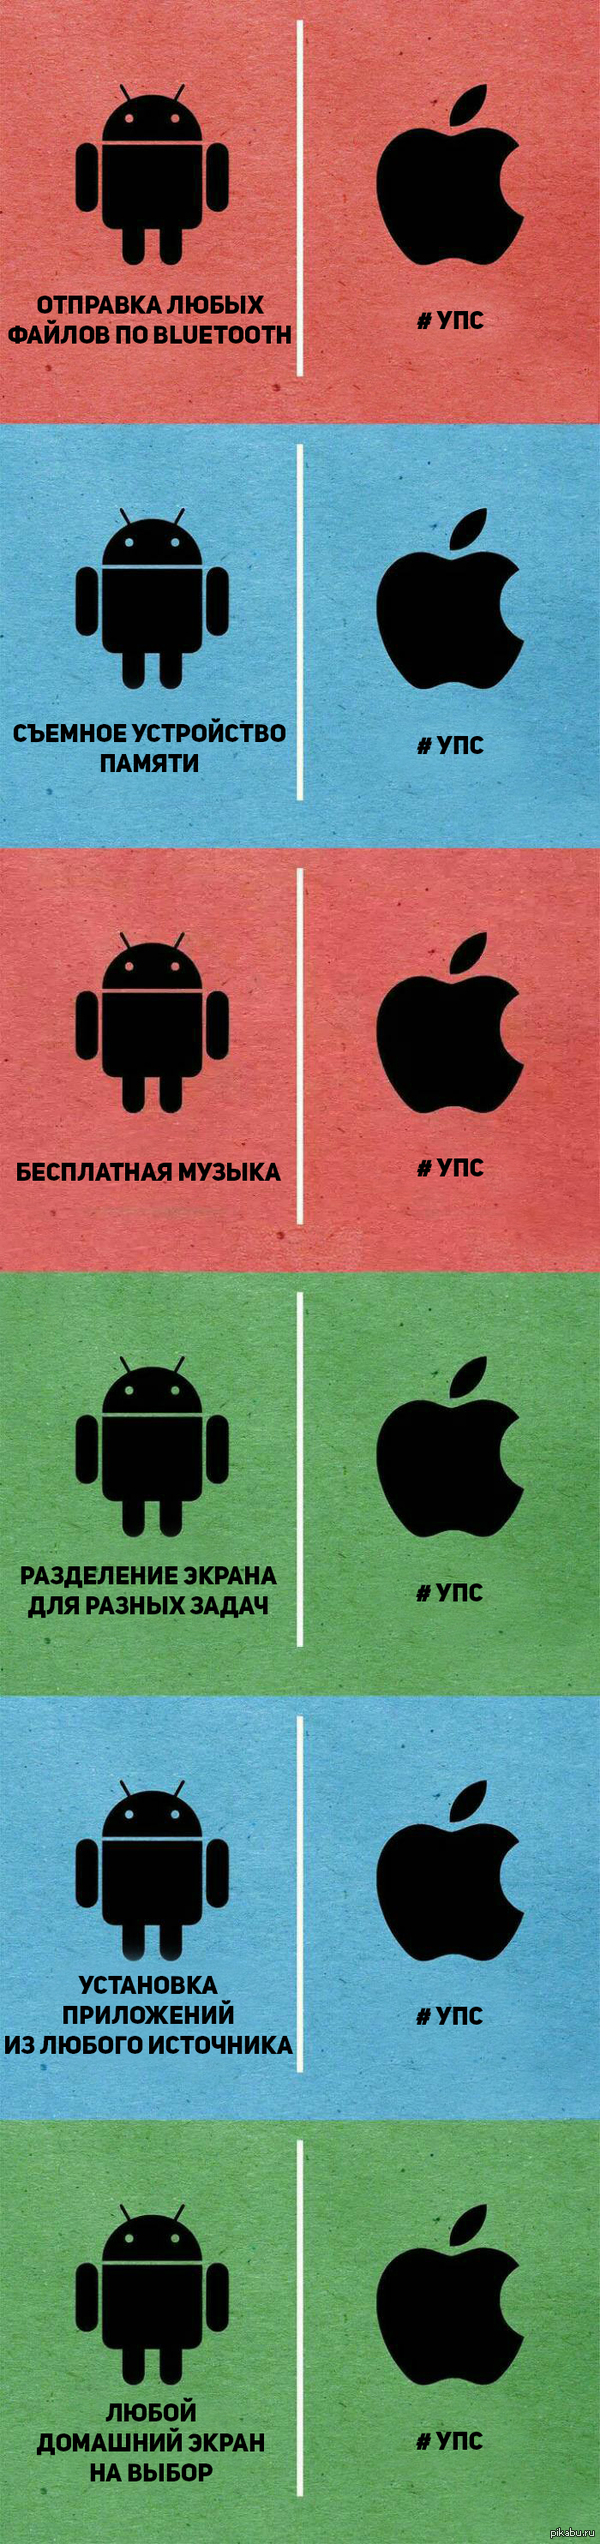 Android VS IOS   